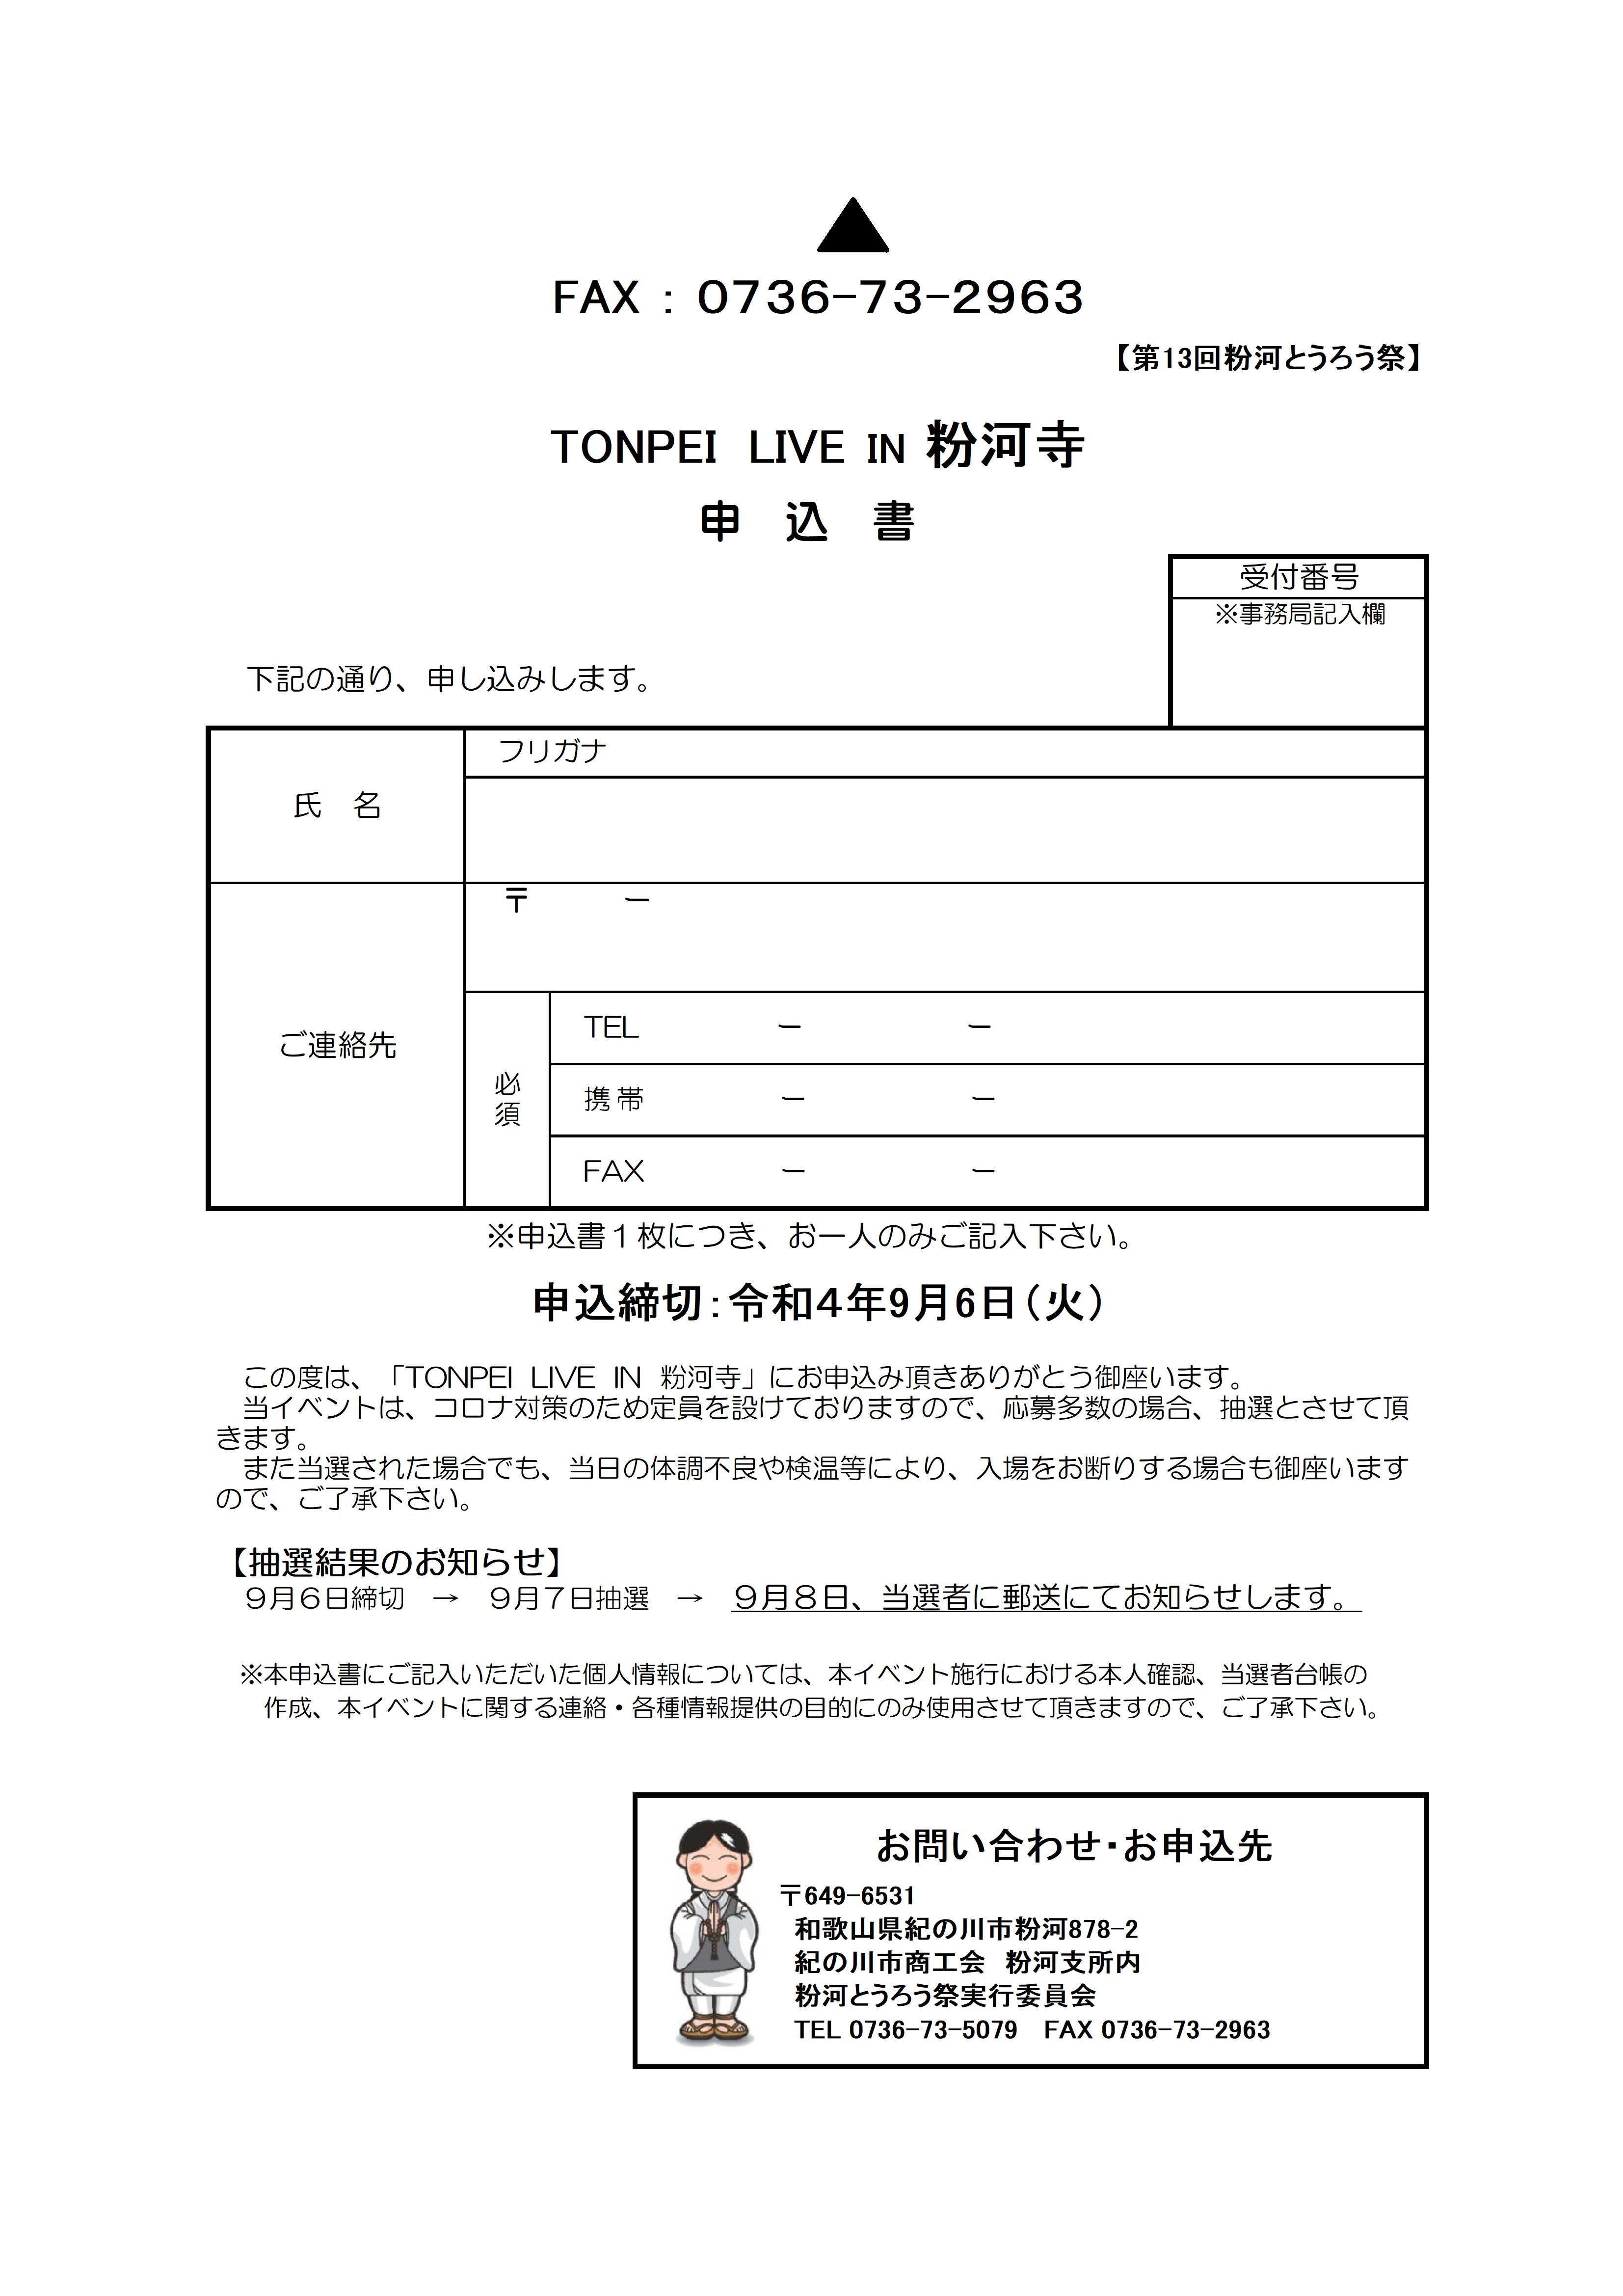 TONPEI LIVE IN 粉河寺